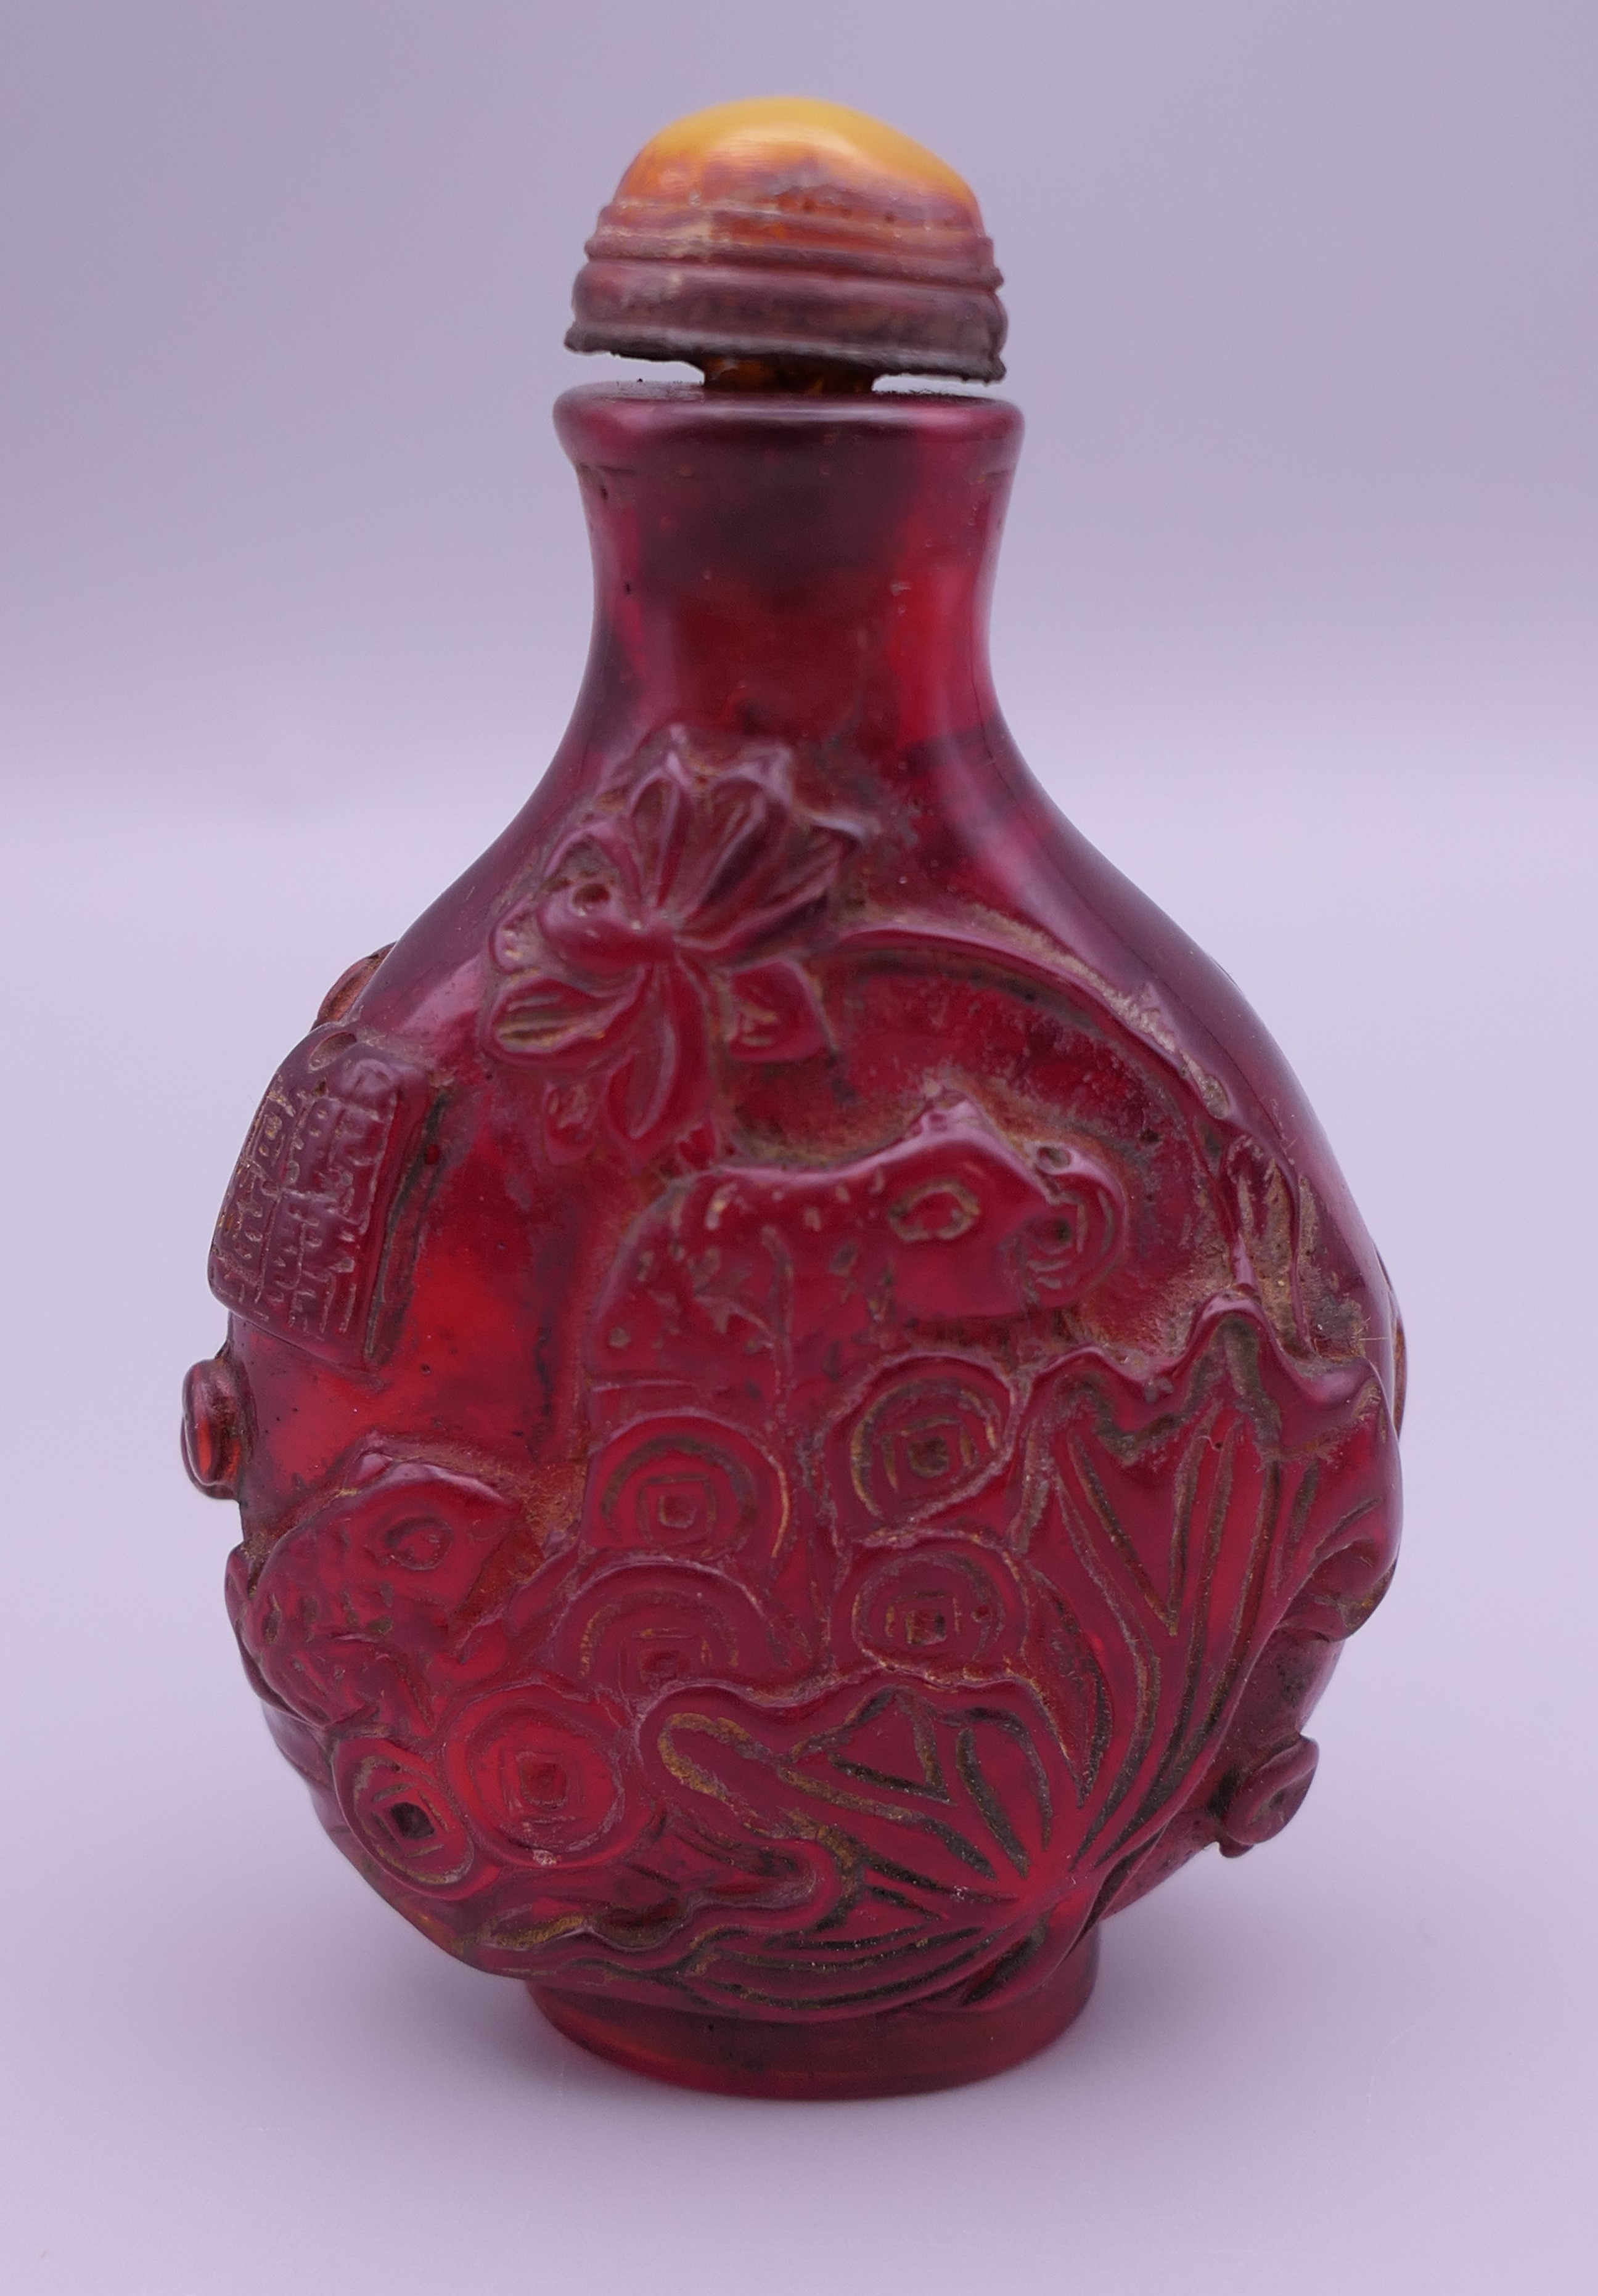 A Chinese snuff bottle. 7.5 cm high.